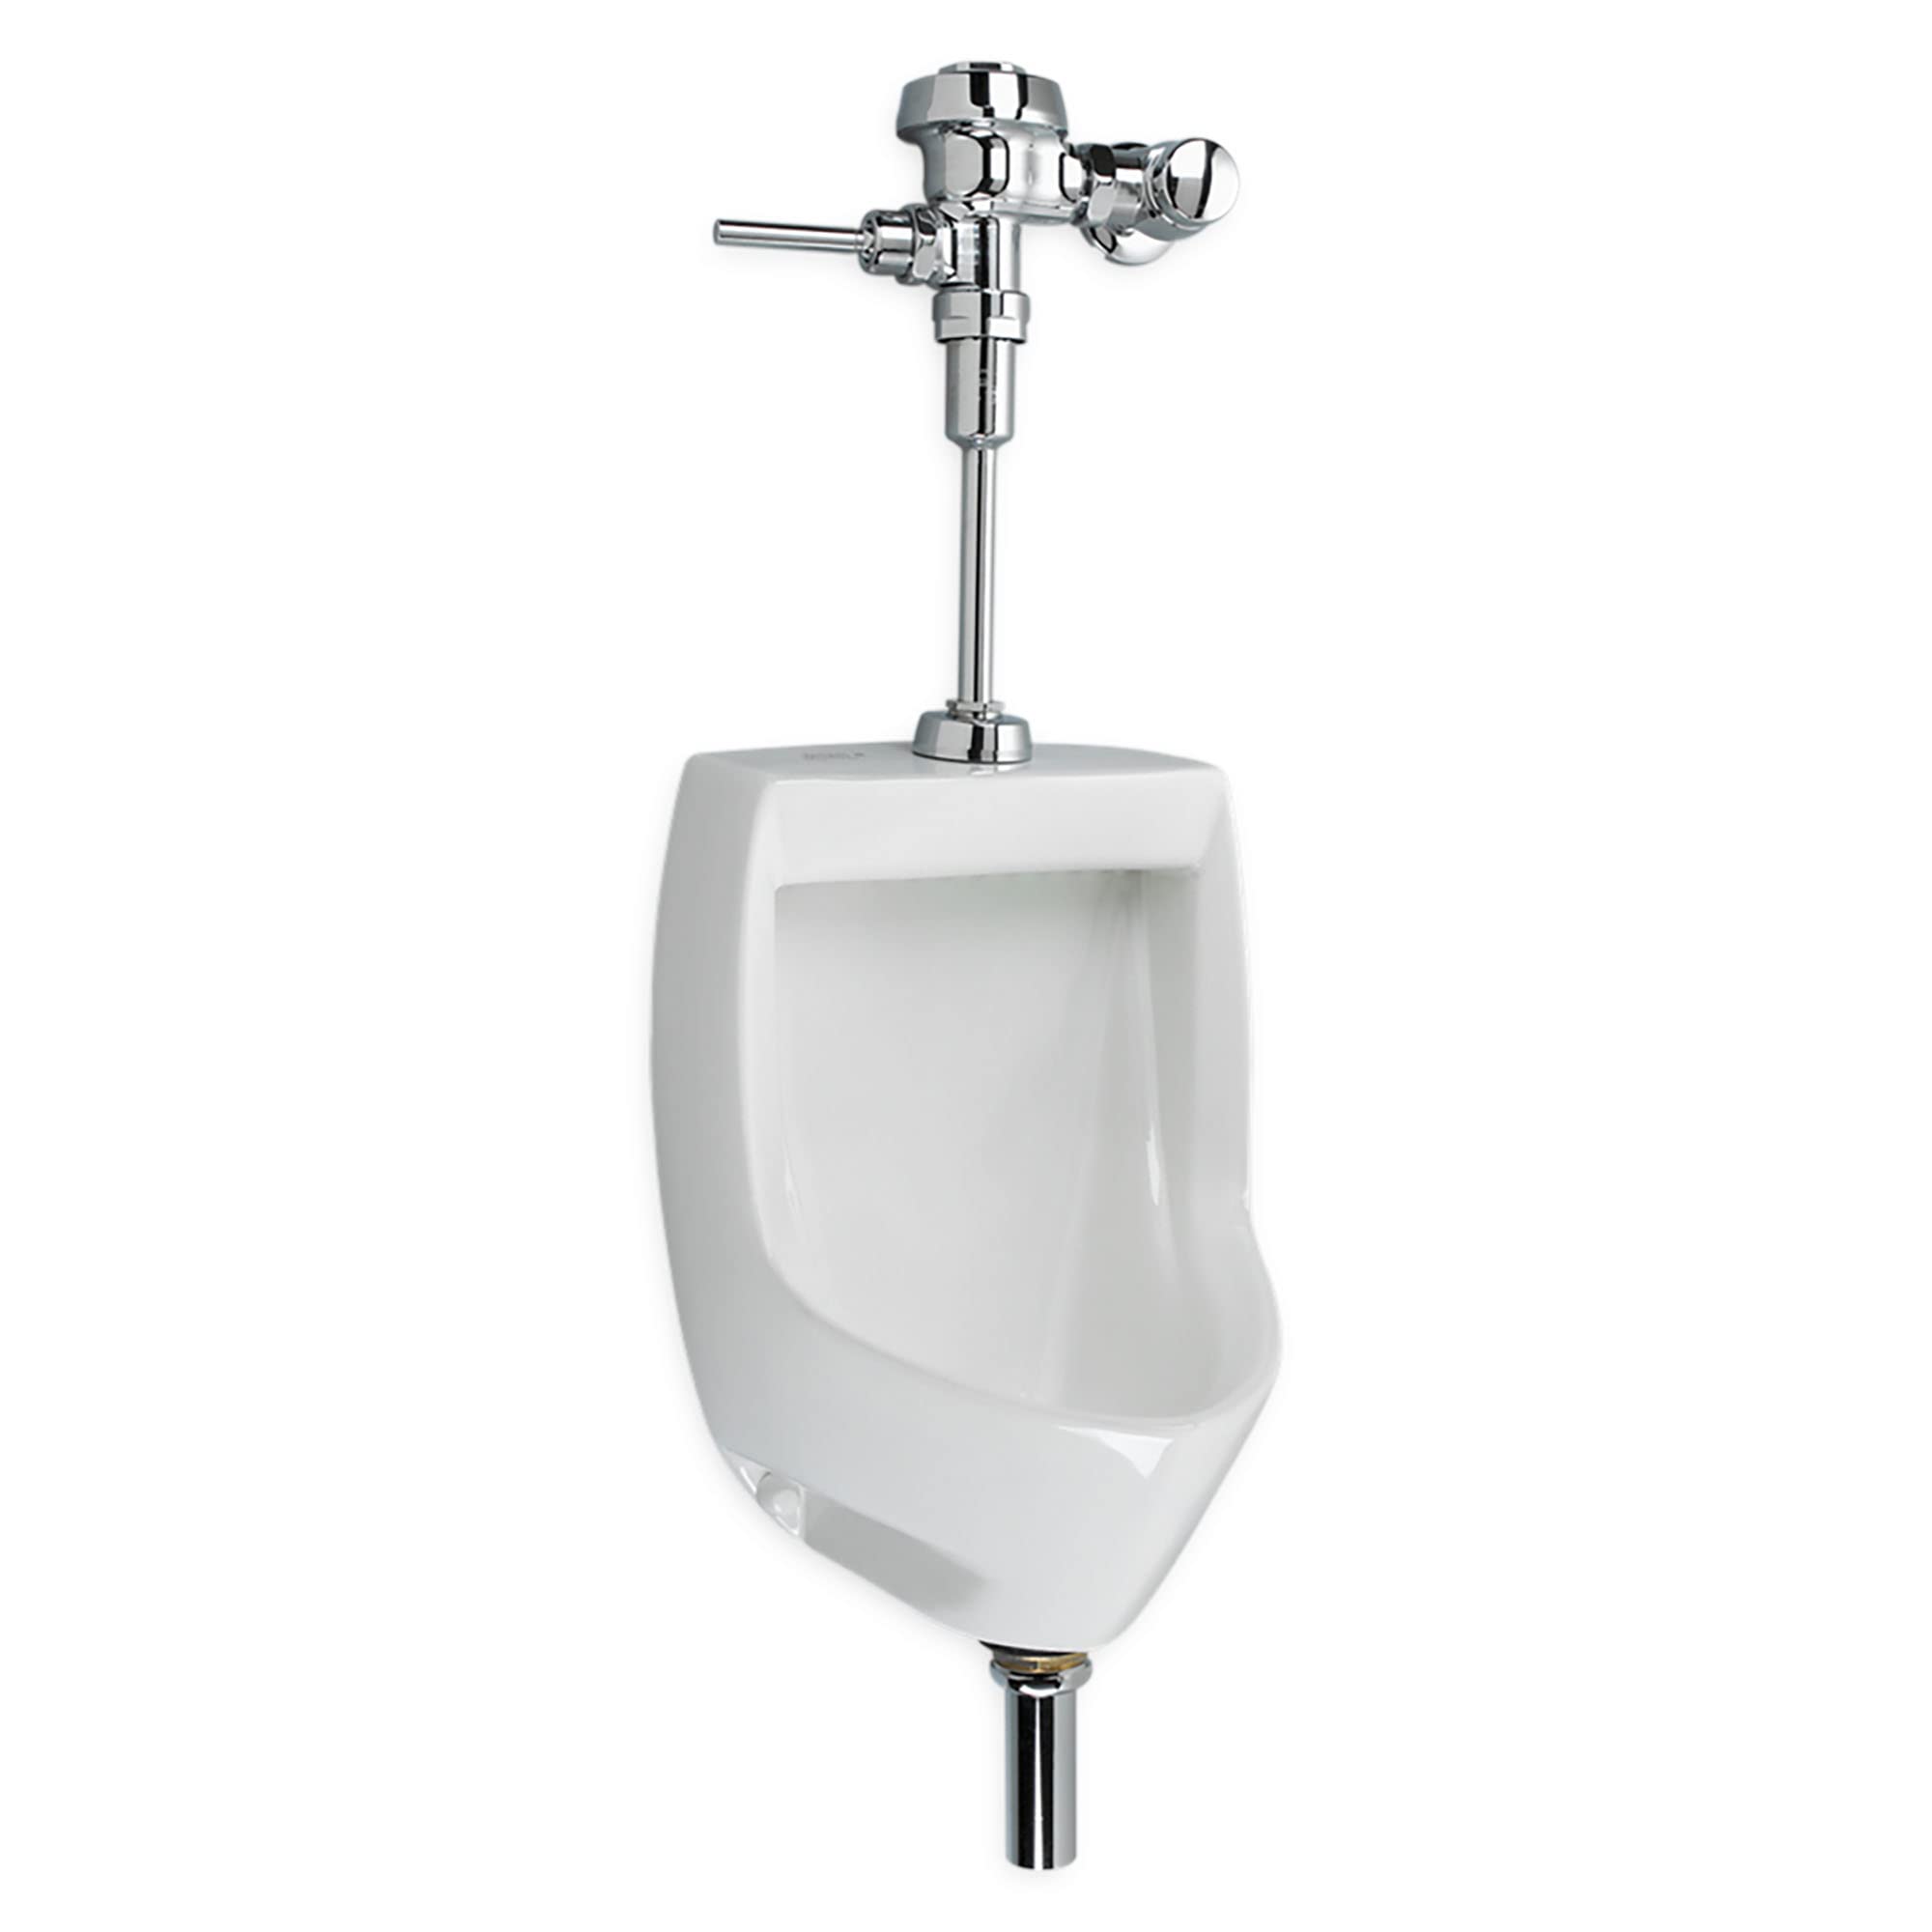 American Standard 6581001EC.020 MAYBROOK Universal Washout Urinal with EverClean, 12.8 x 12.8 x 18 inches, White